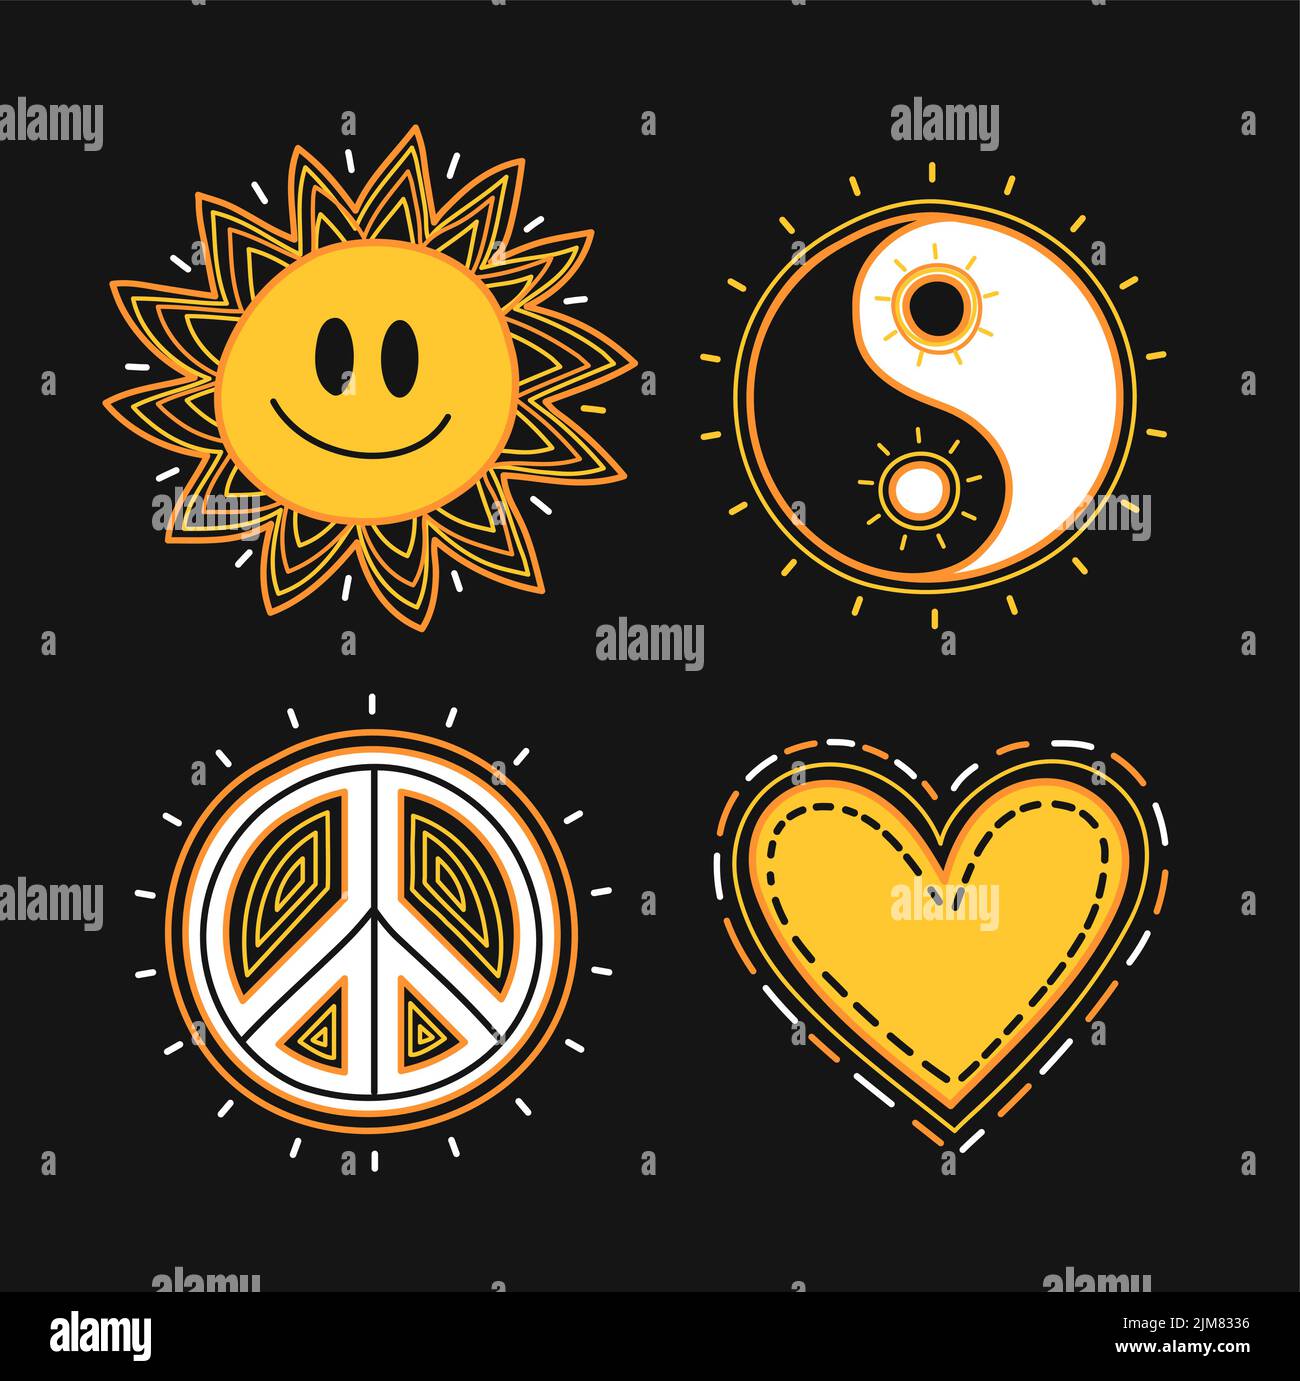 Yin Yang,peace hippie sign,sun with smile face.Vector hand drawn cartoon character illustration.Yin Yang,smile face sun,heart,love hippie peace symbol,boho,60s,70s set collection print Stock Vector